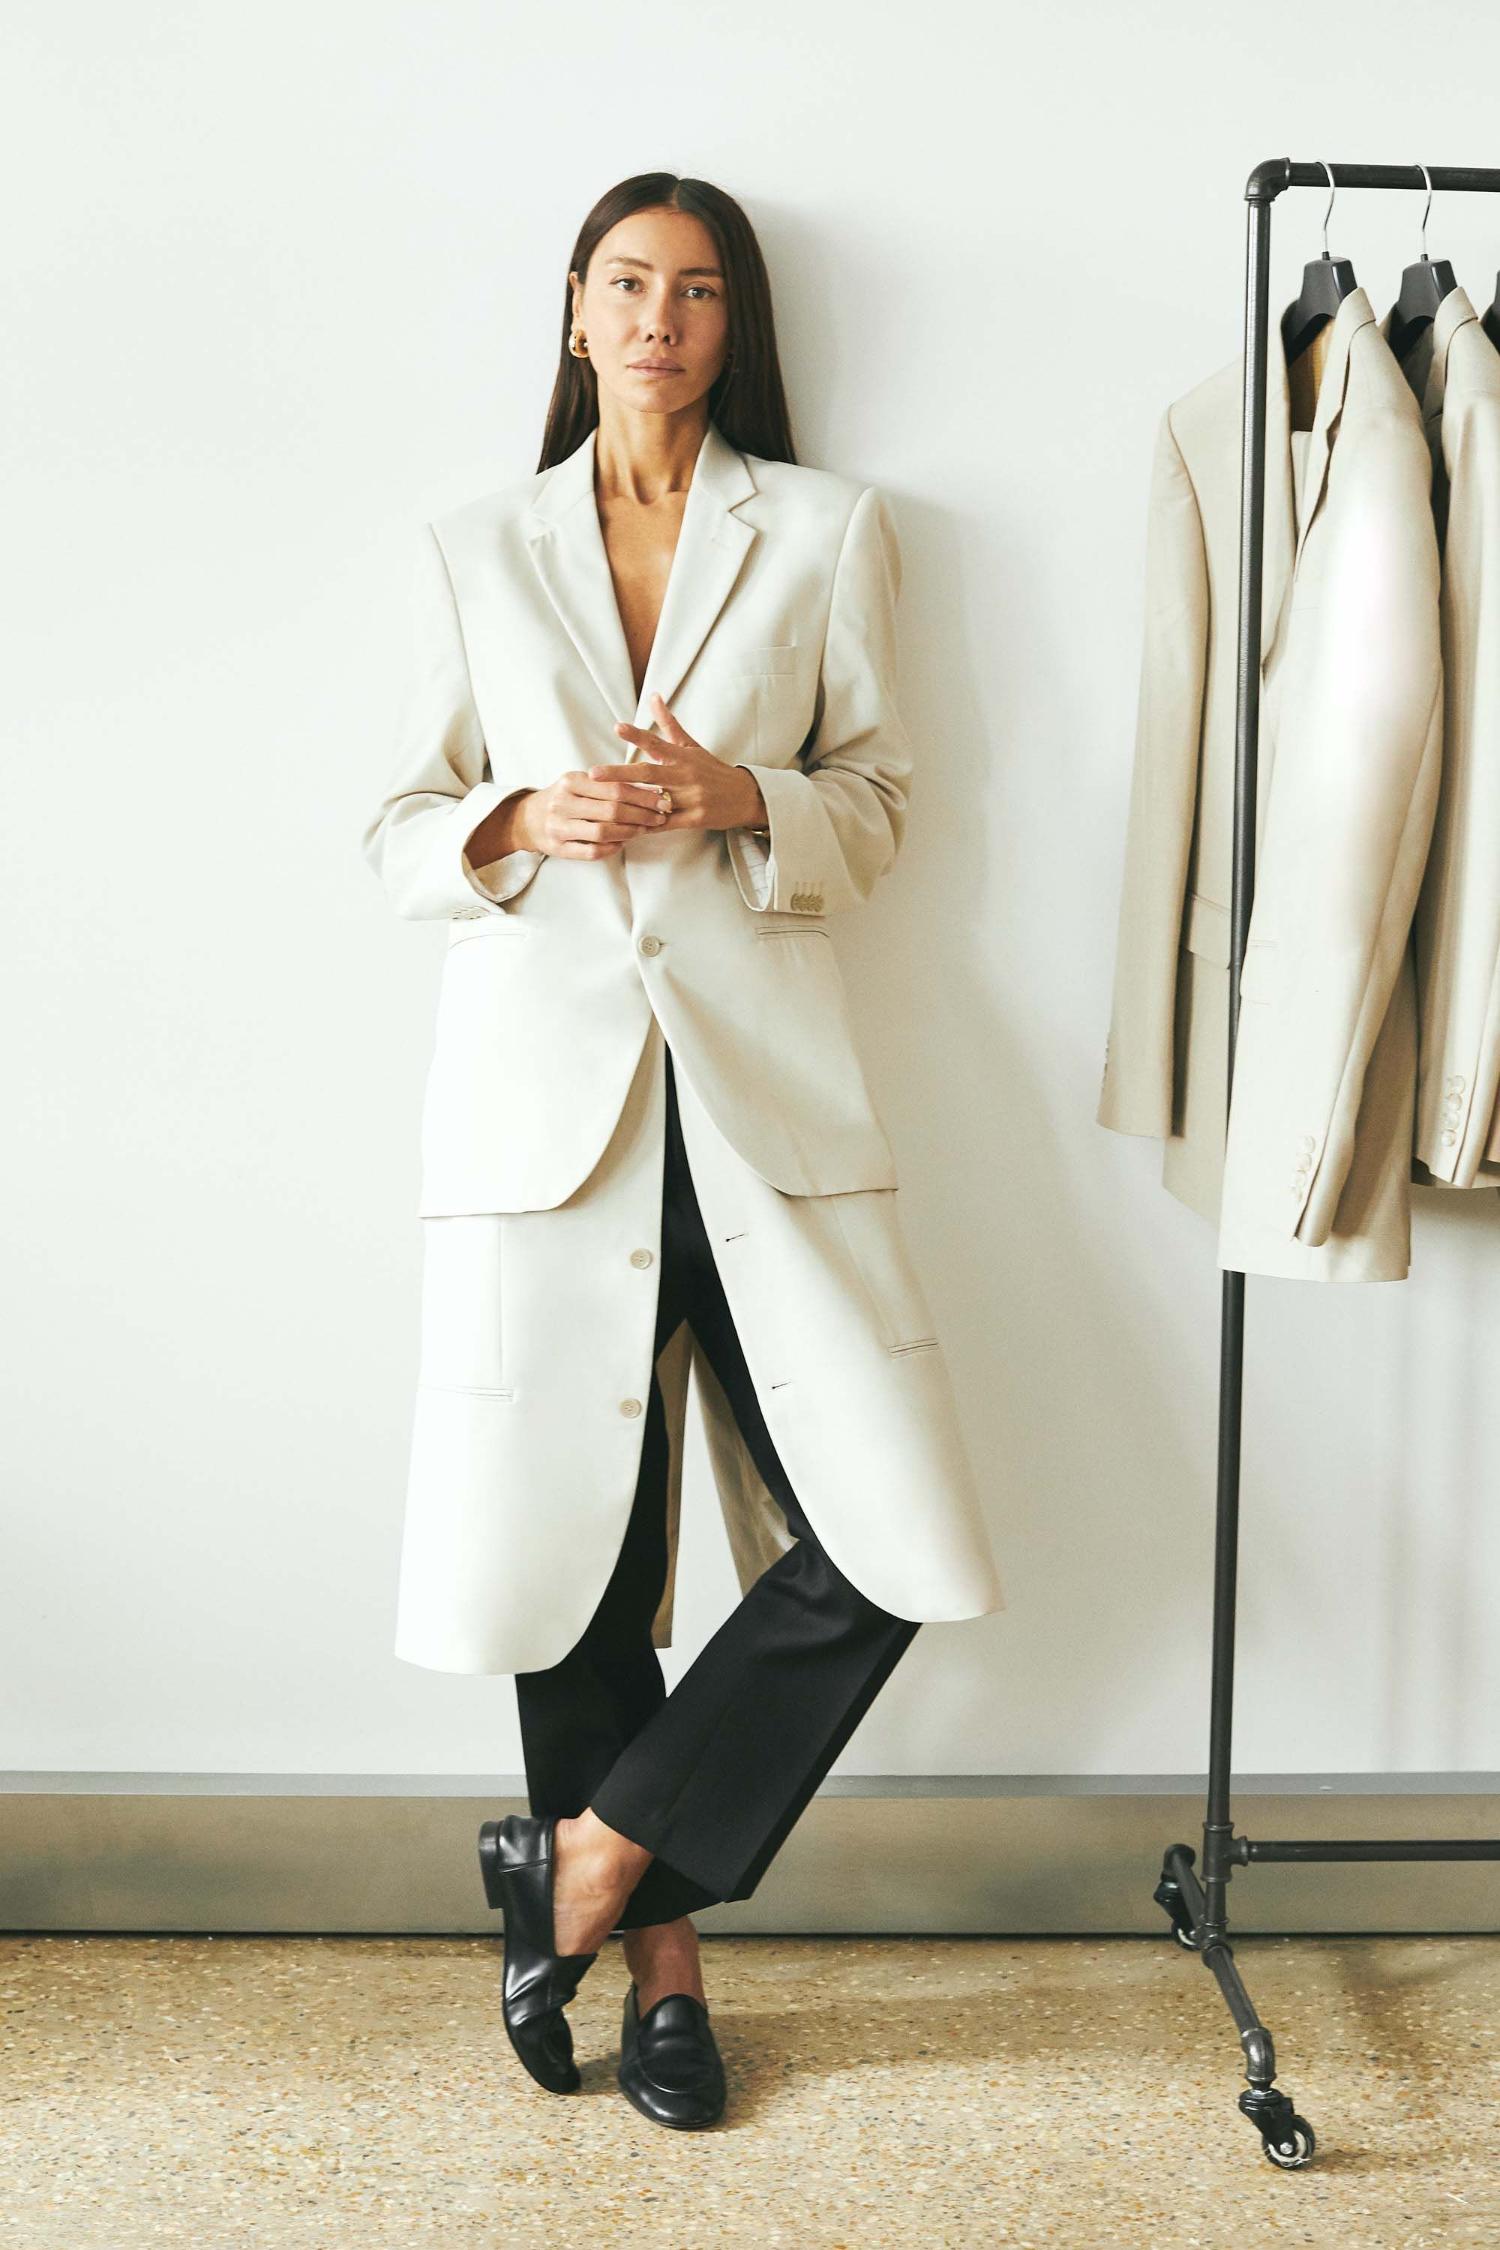 Minimal Fashion Upcycled Men's Suits Outfits for Women